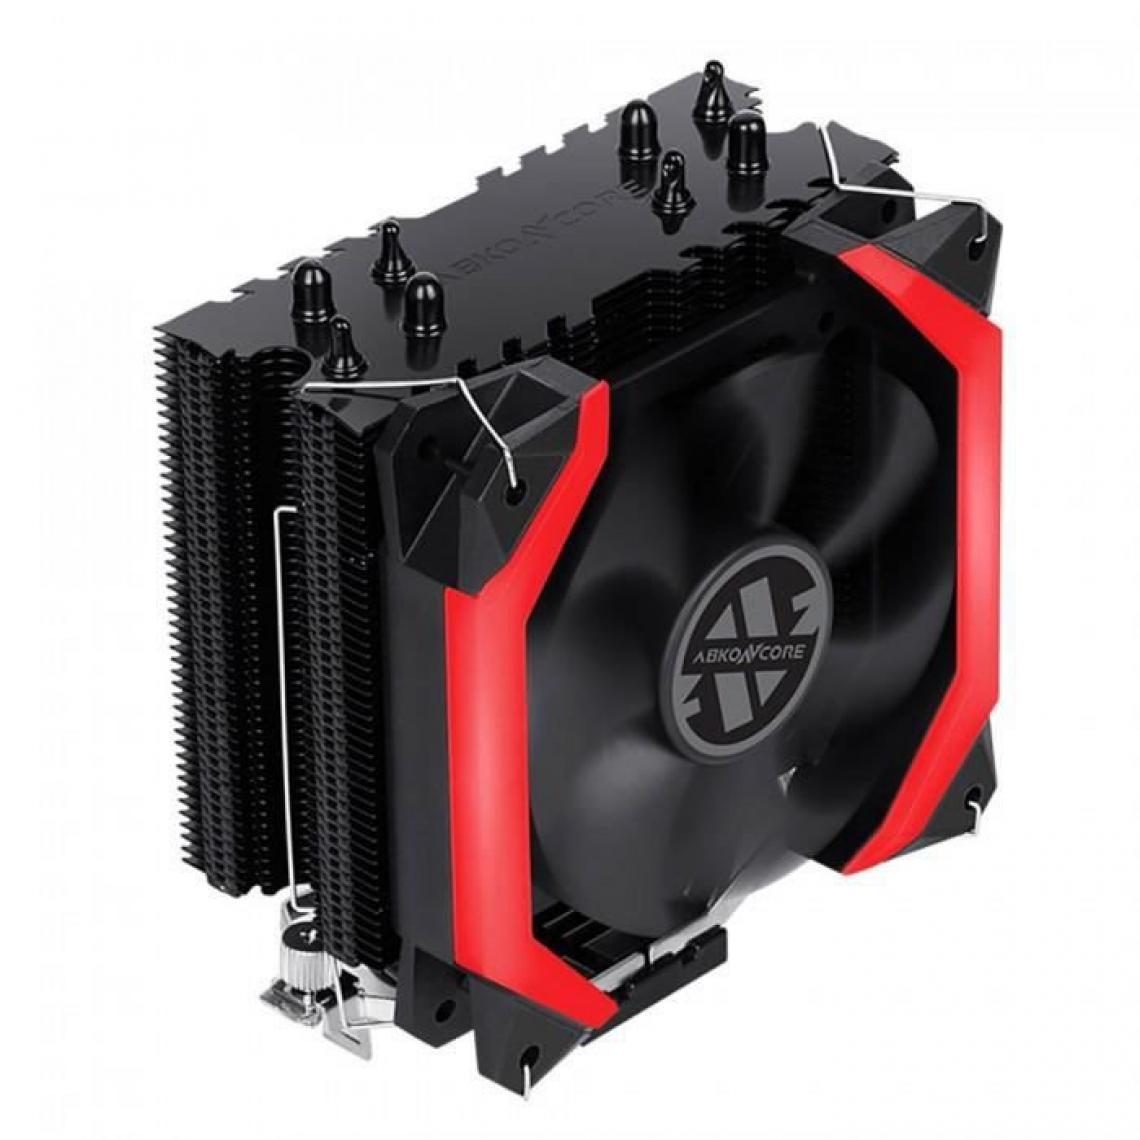 Abkoncore - ABKONCORE CoolStorm T402B Spider Red - Ventirad CPU - Kit watercooling